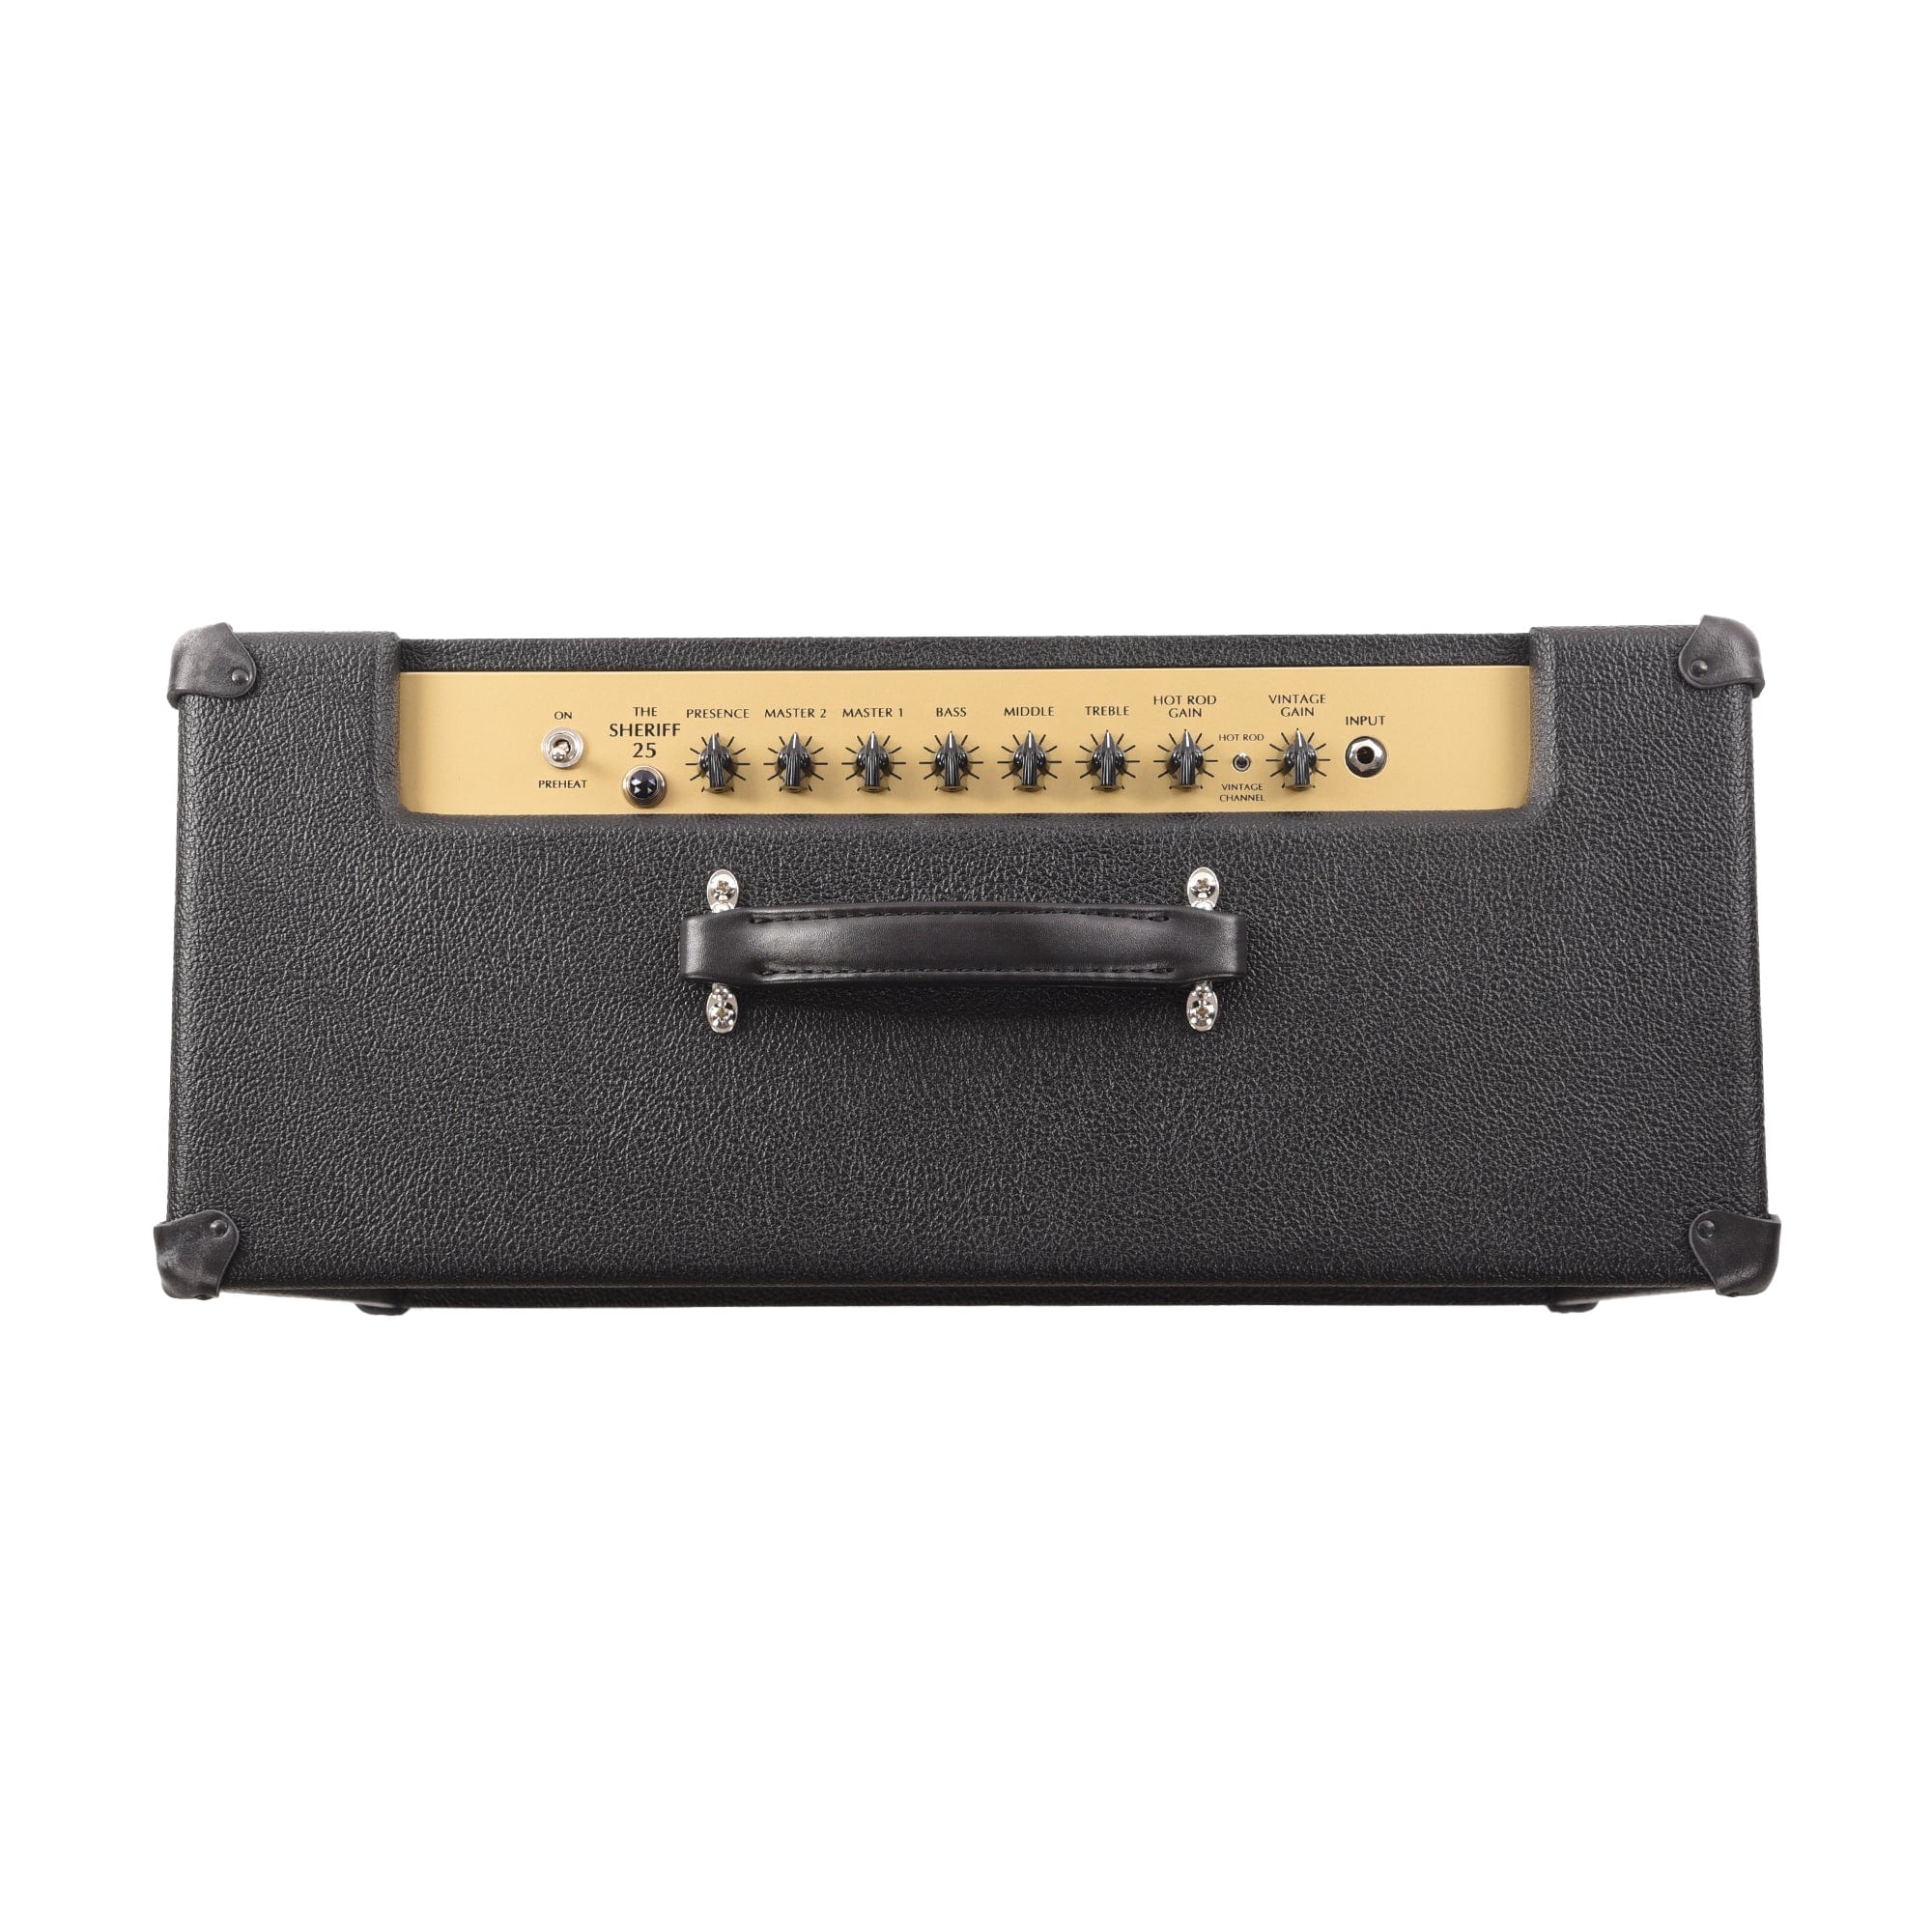 Victory Sheriff 25 1x12 Combo Amps / Guitar Combos